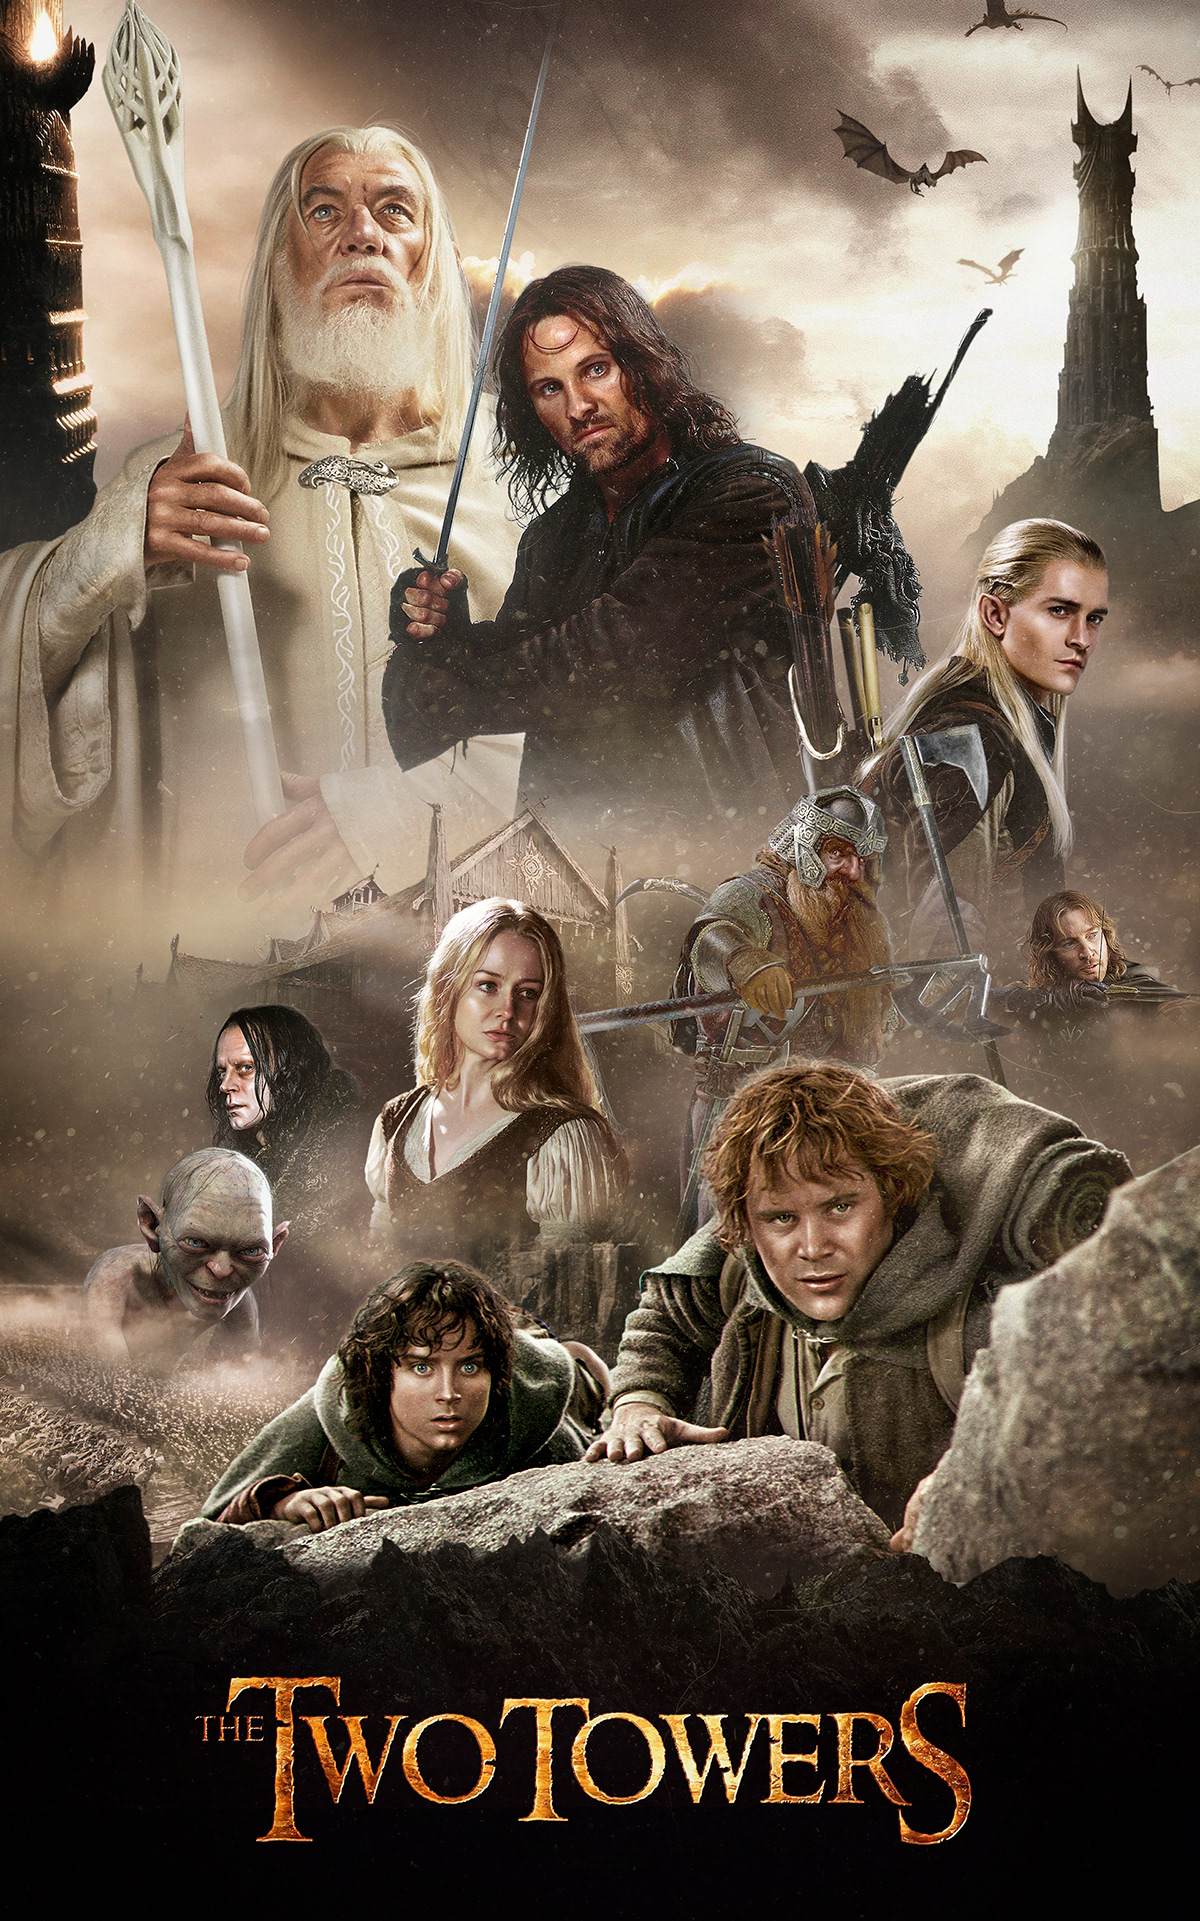 The lord of the rings the two towers frodo sam legolas Gimli movie Gollum